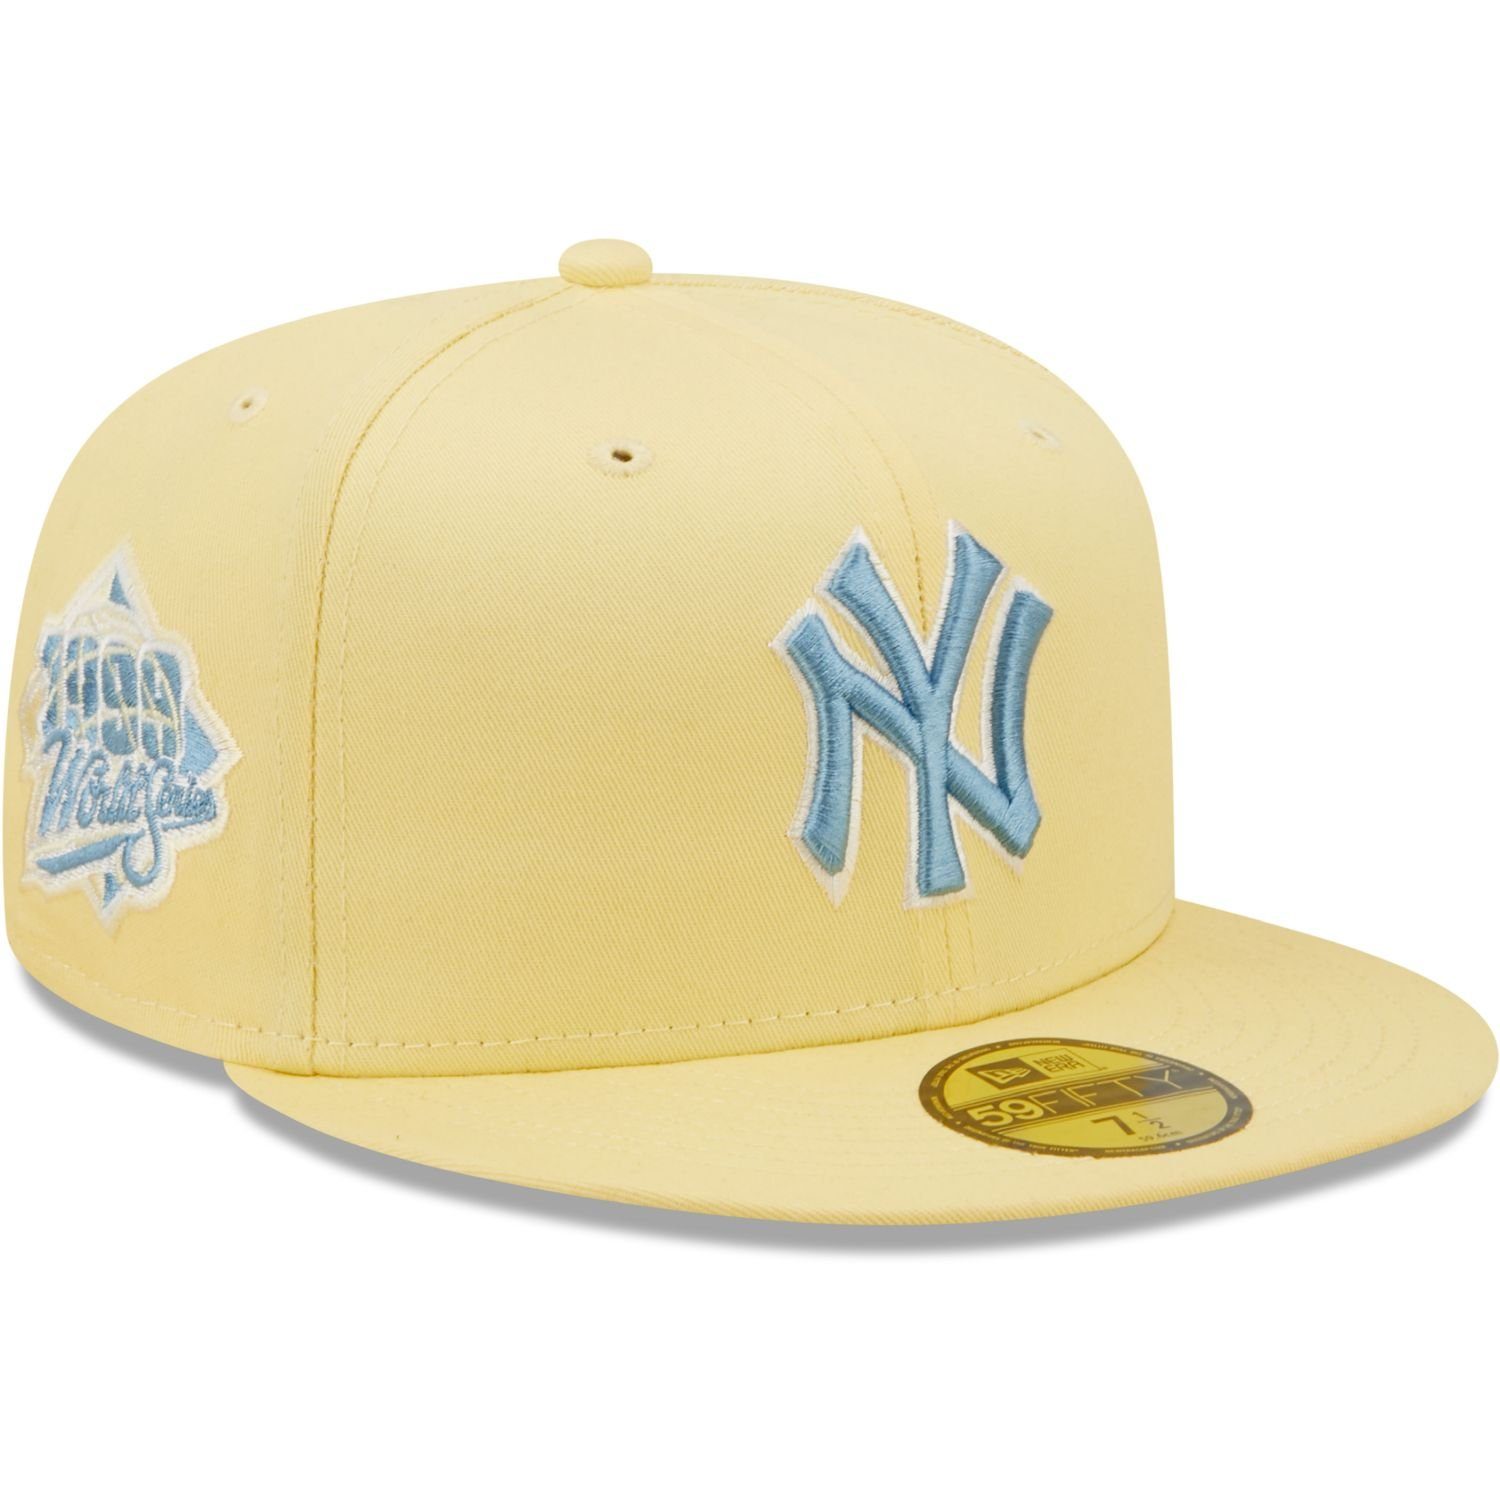 New Era York Fitted Yankees COOPERSTOWN Cap 59Fifty New